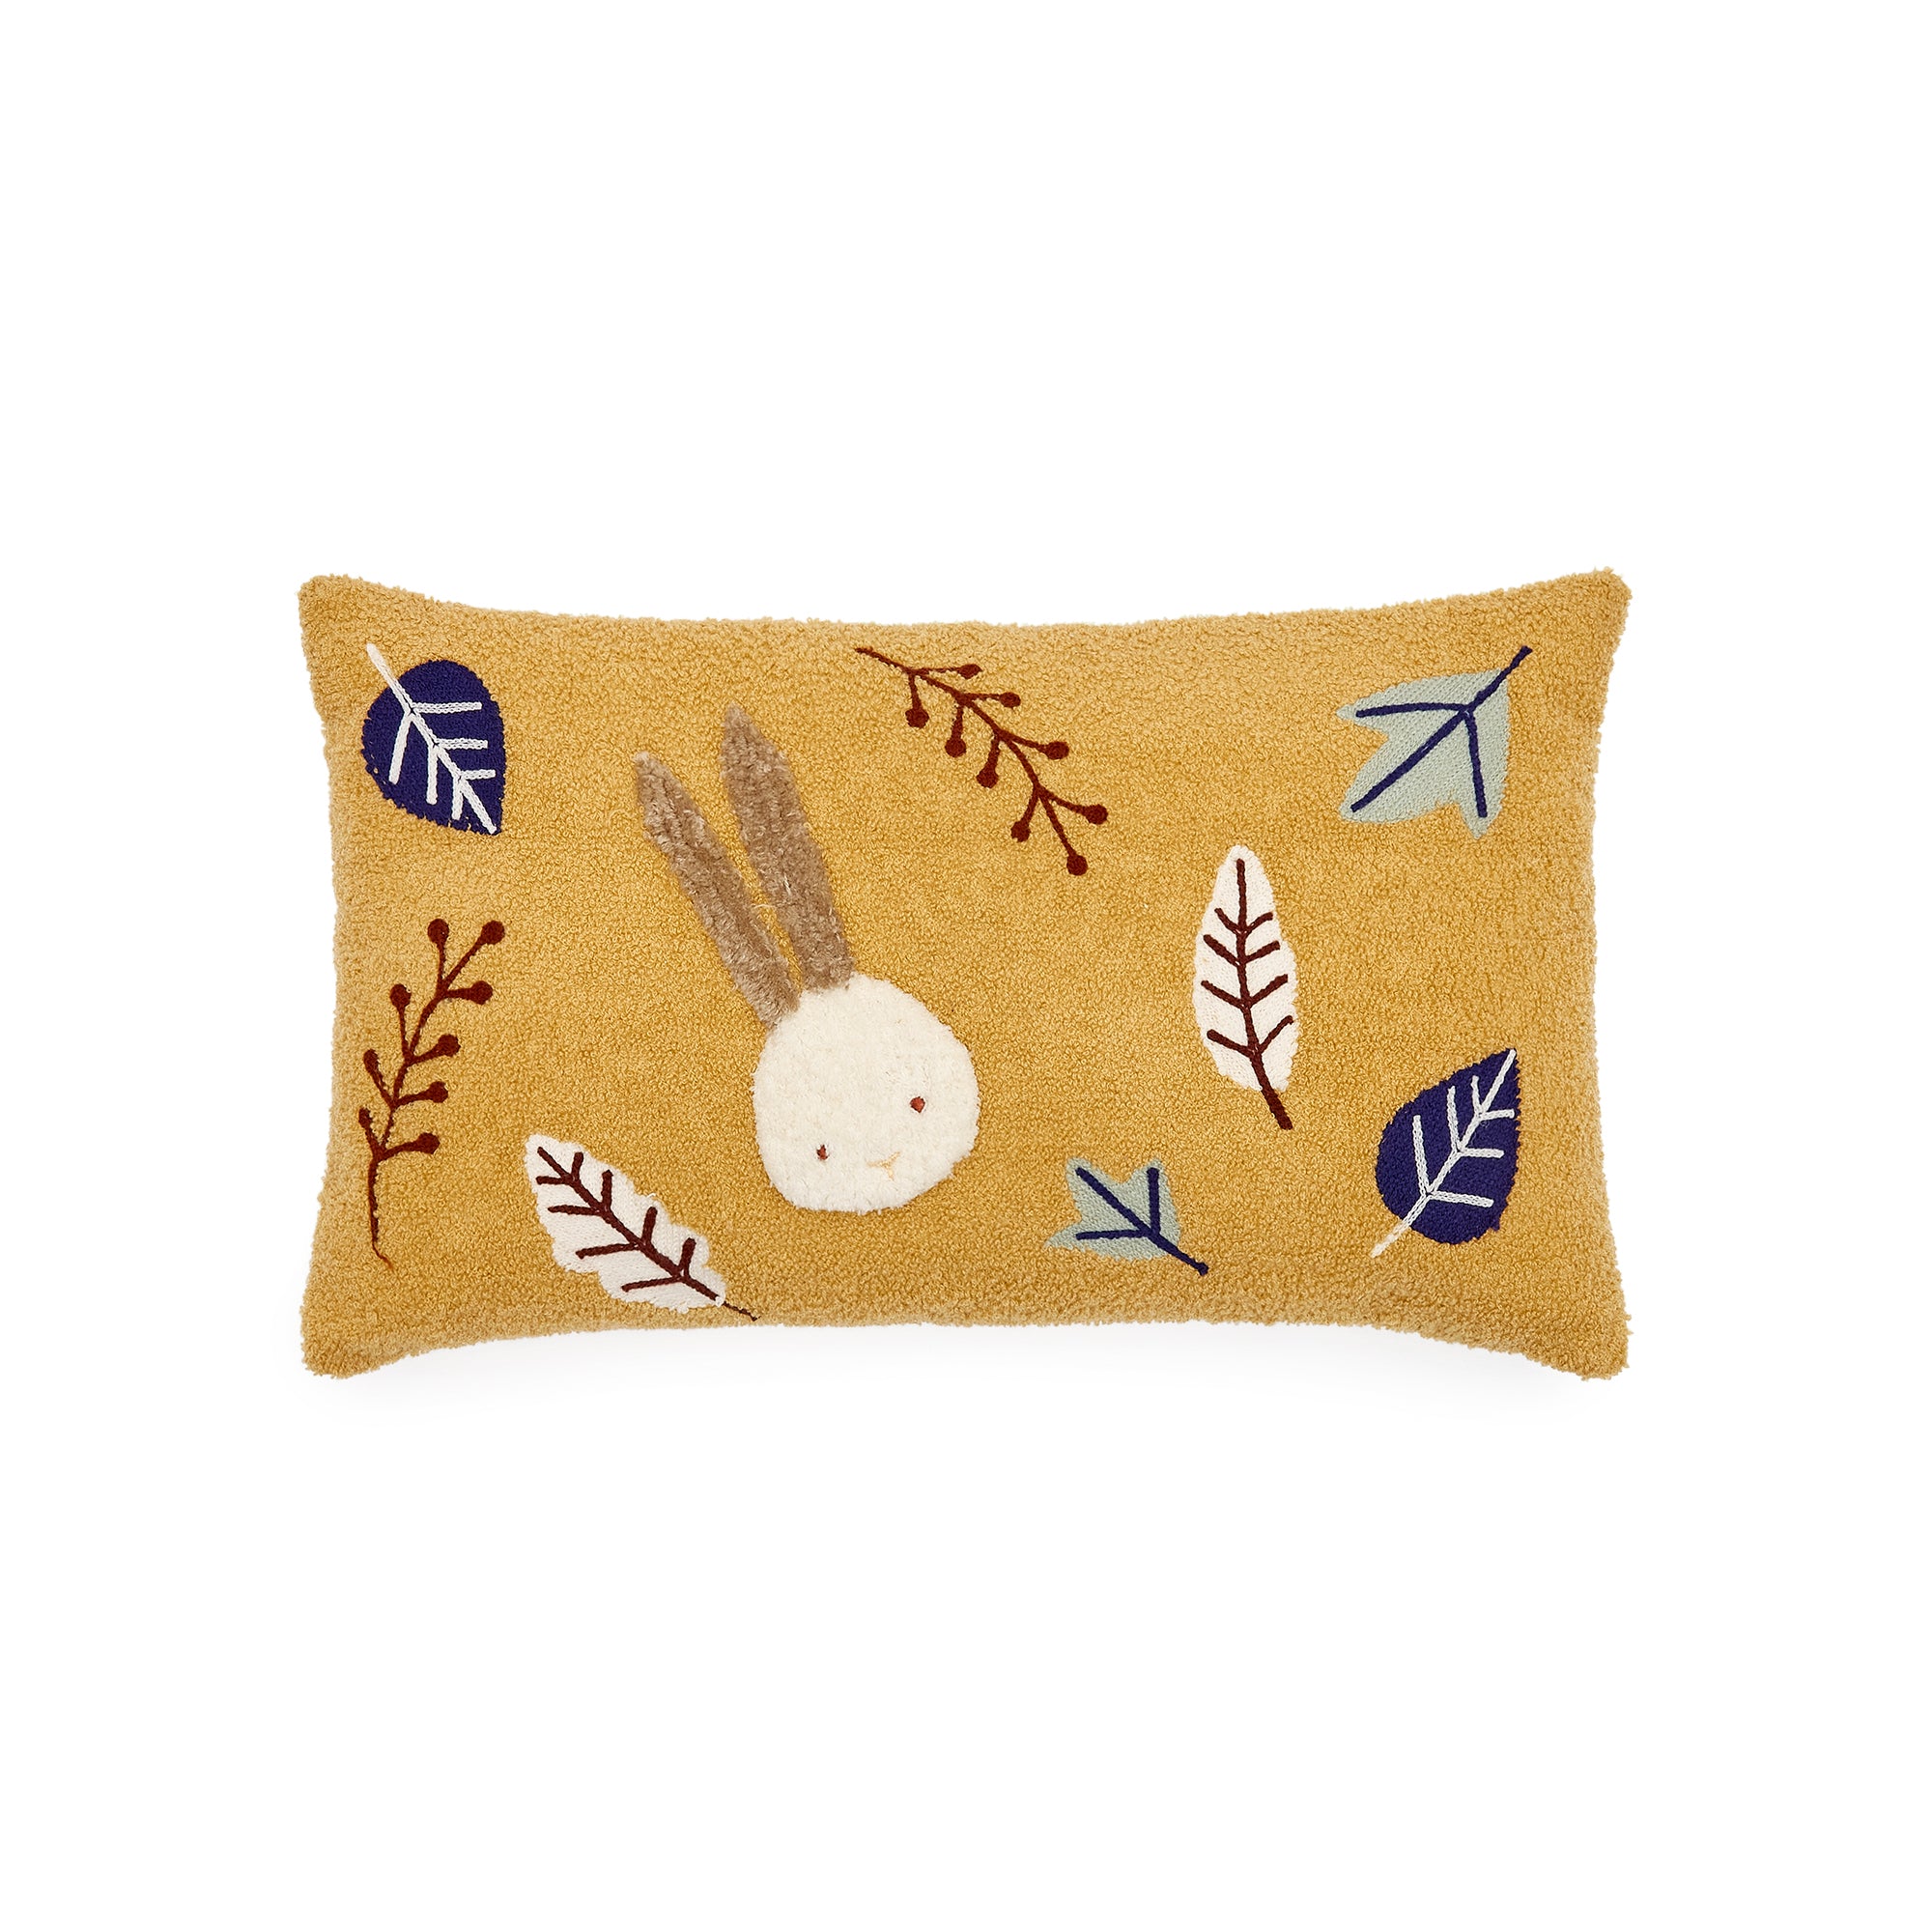 Yanil cushion cover in mustard fleece with multicolour embroidered leaves, 30 x 50 cm